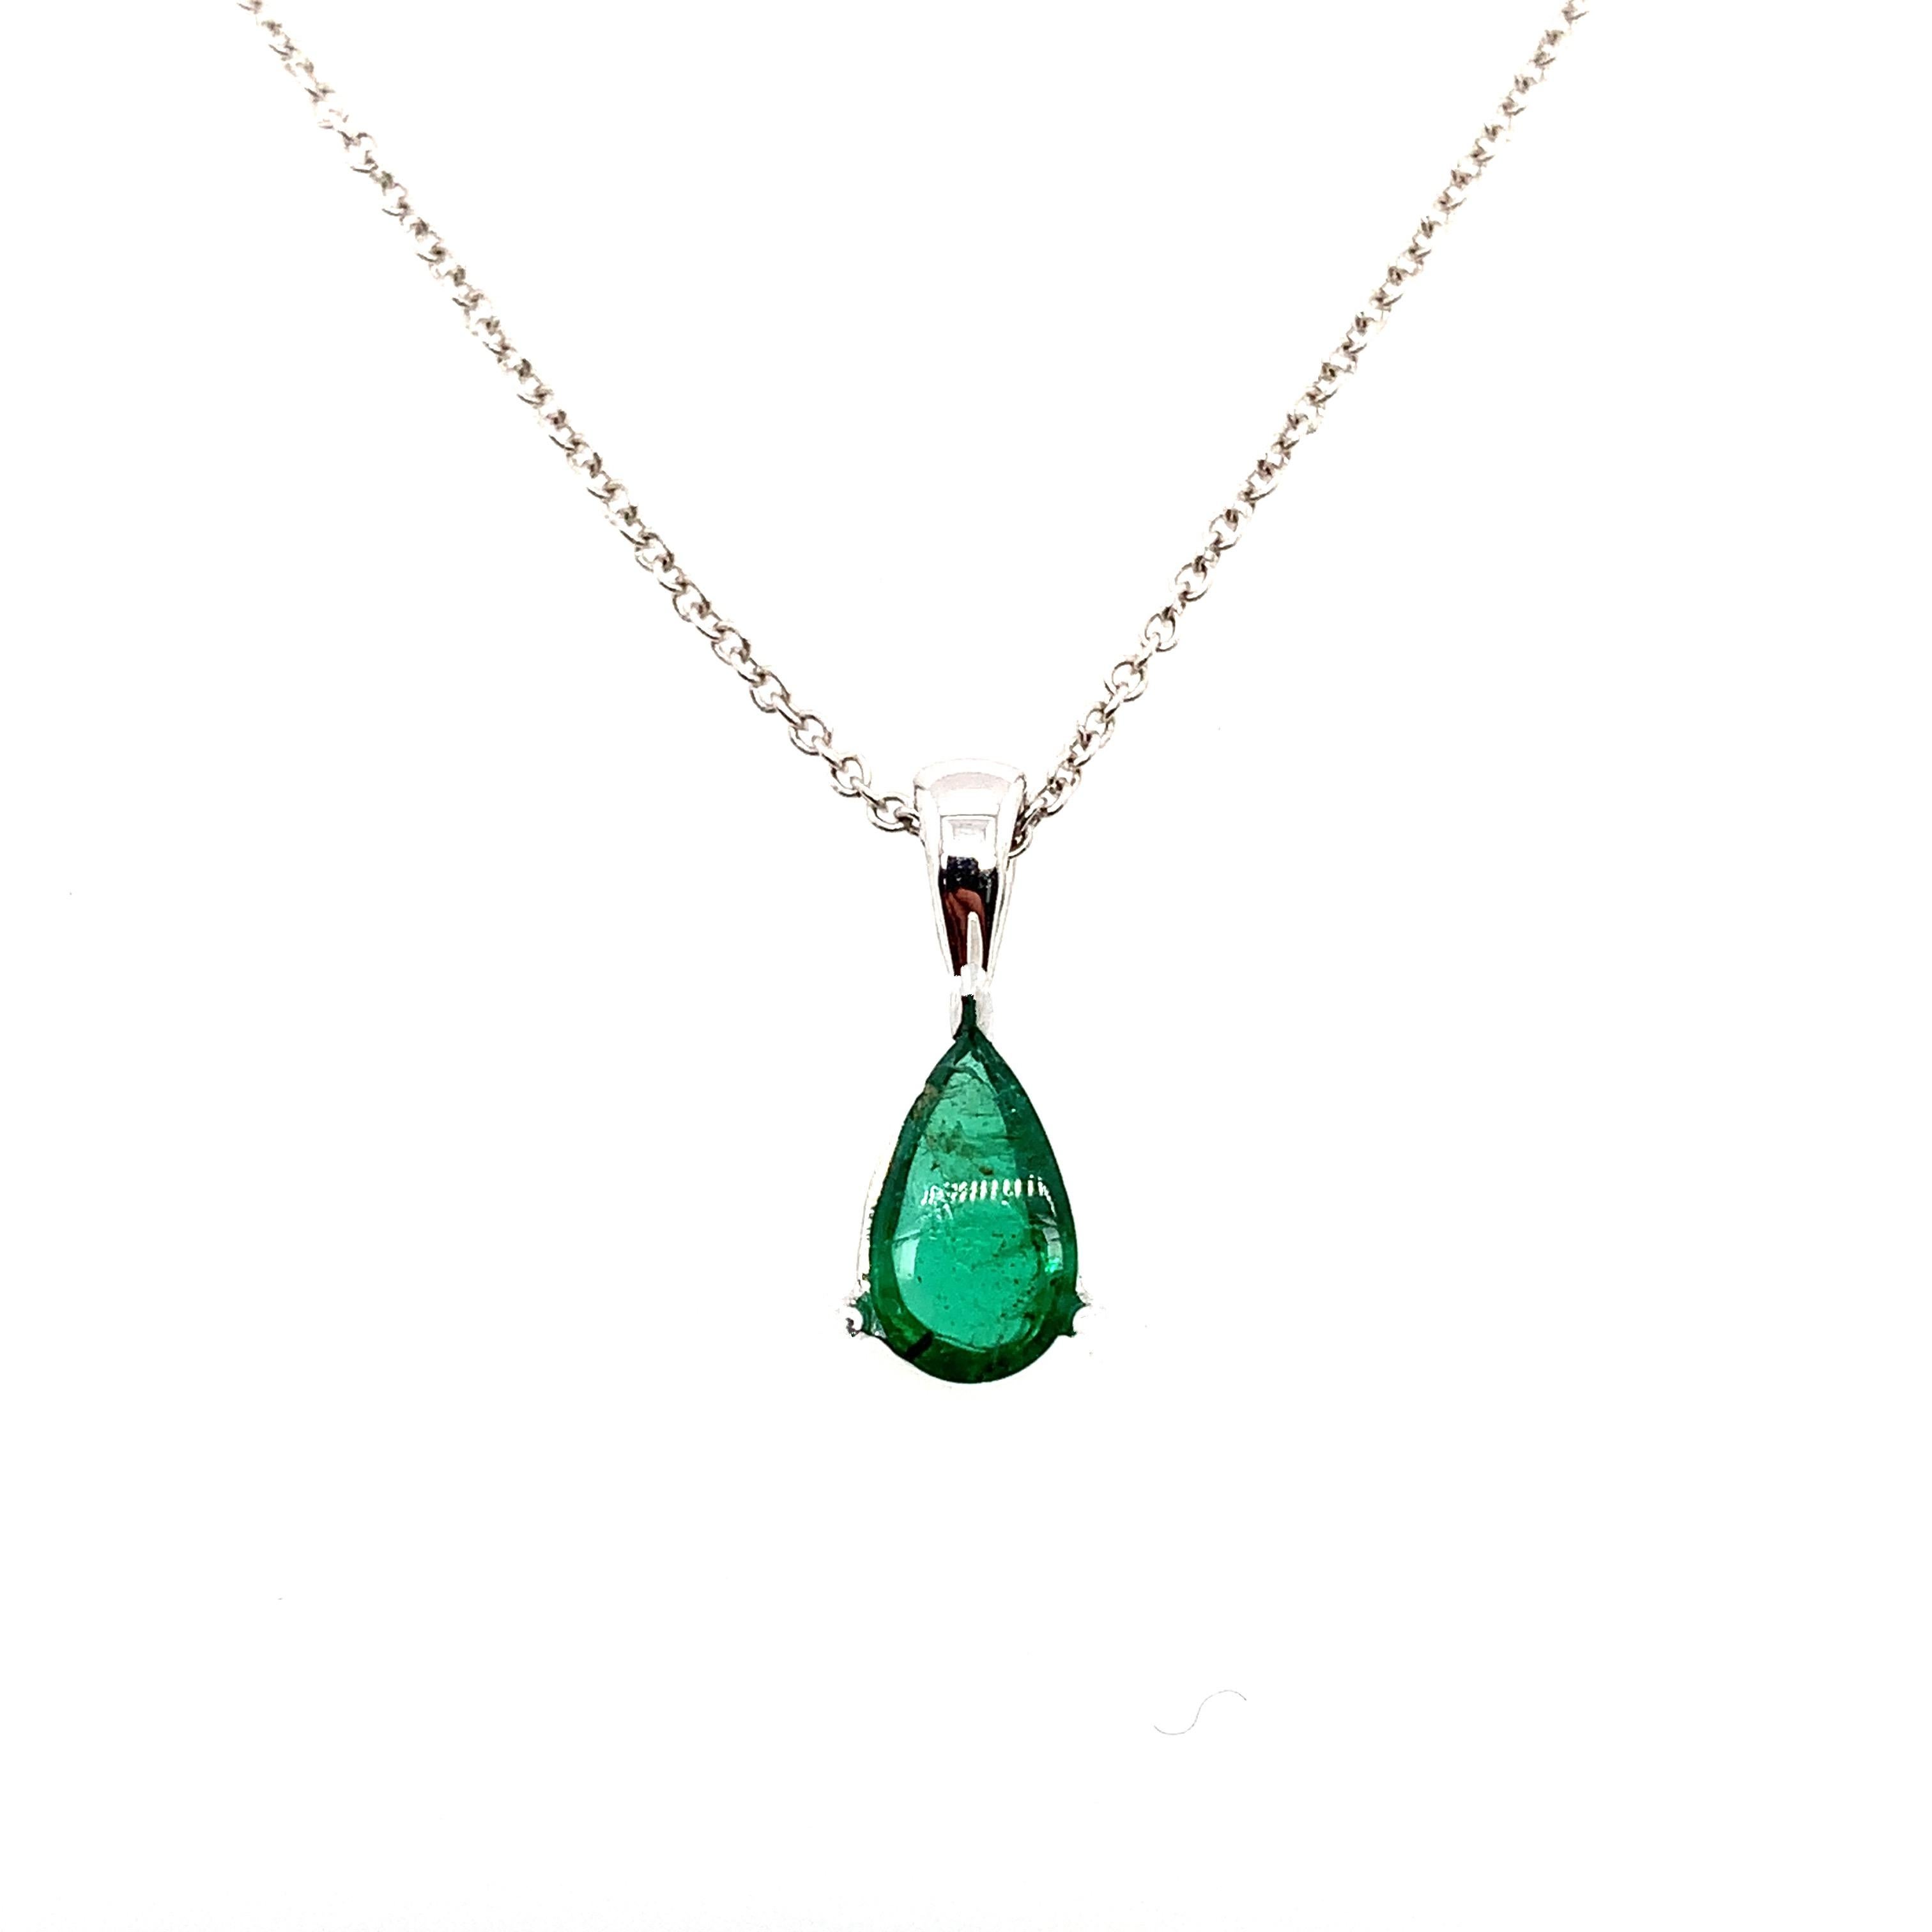 Green emerald drop pendant necklace 18k white gold
Gorgeous green emerald pear shaped gemstone mounted in 18k white gold art deco style solitaire pendant necklace in 18k white gold.
Perfect art deco style drop necklace with single solitaire drop